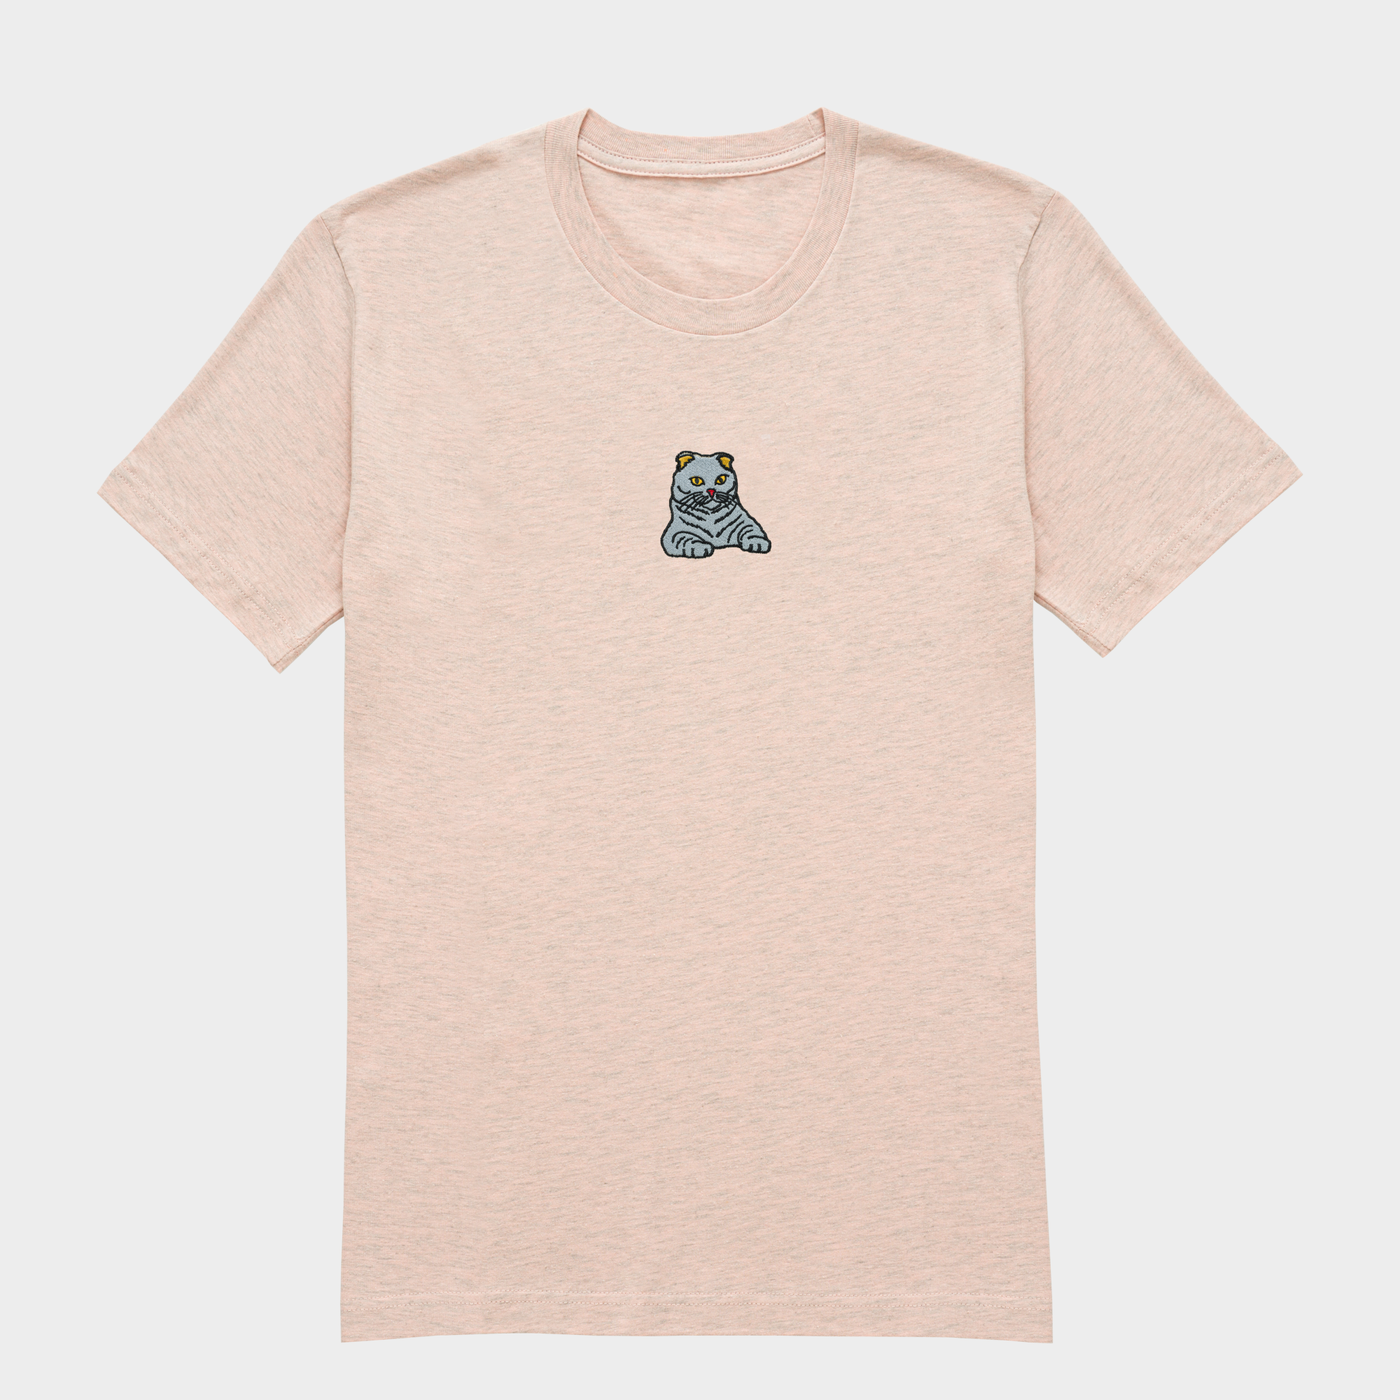 Bobby's Planet Women's Embroidered Scottish Fold T-Shirt from Paws Dog Cat Animals Collection in Heather Prism Peach Color#color_heather-prism-peach